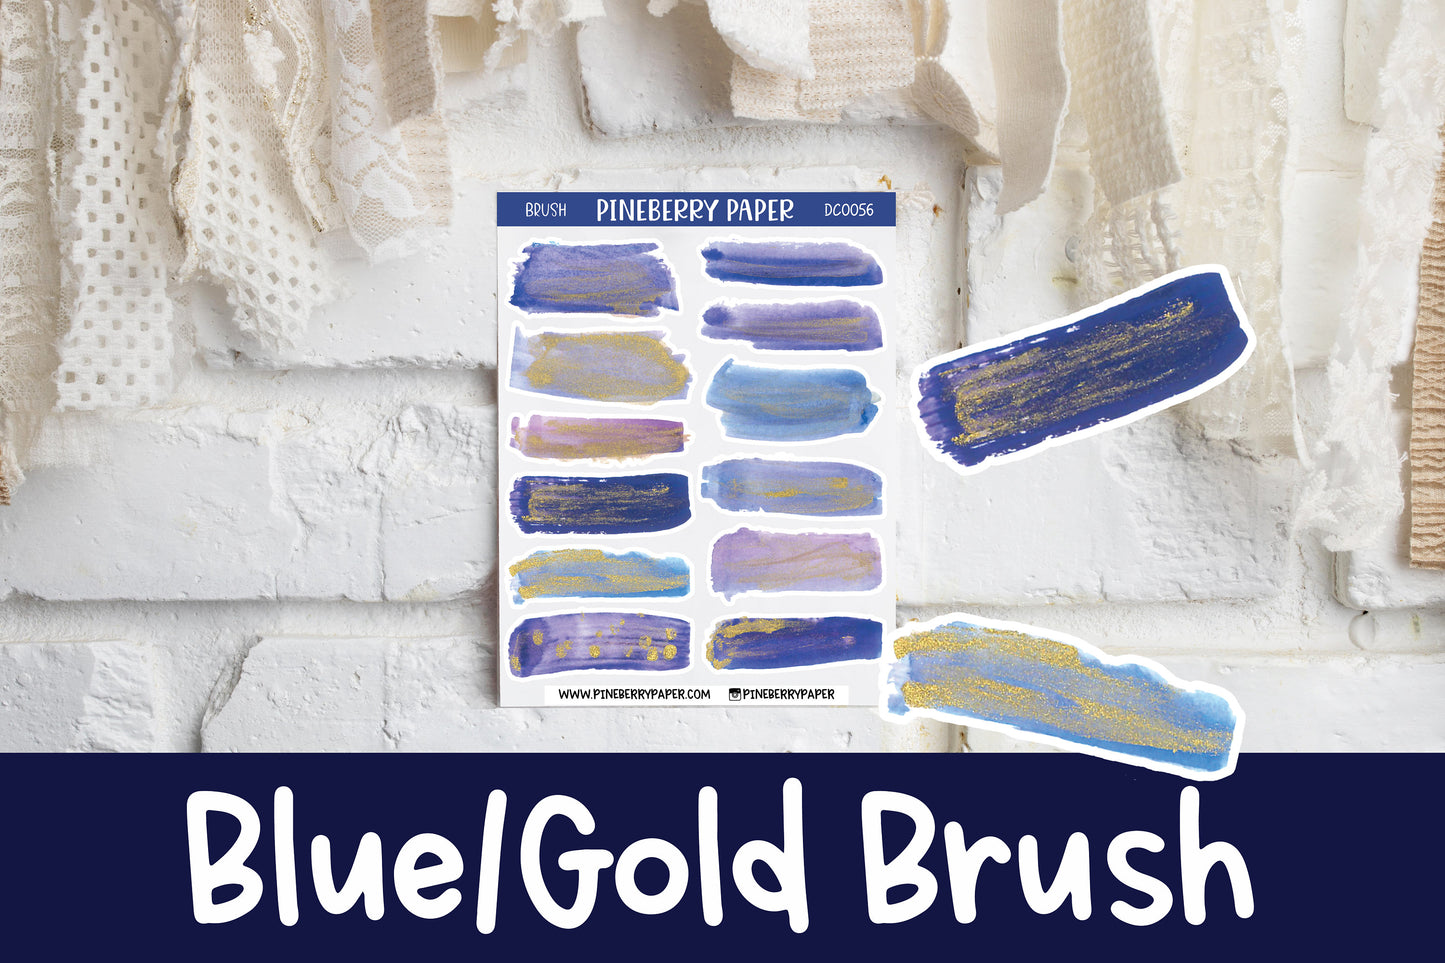 Blue and Gold Brushstrokes | DC0056